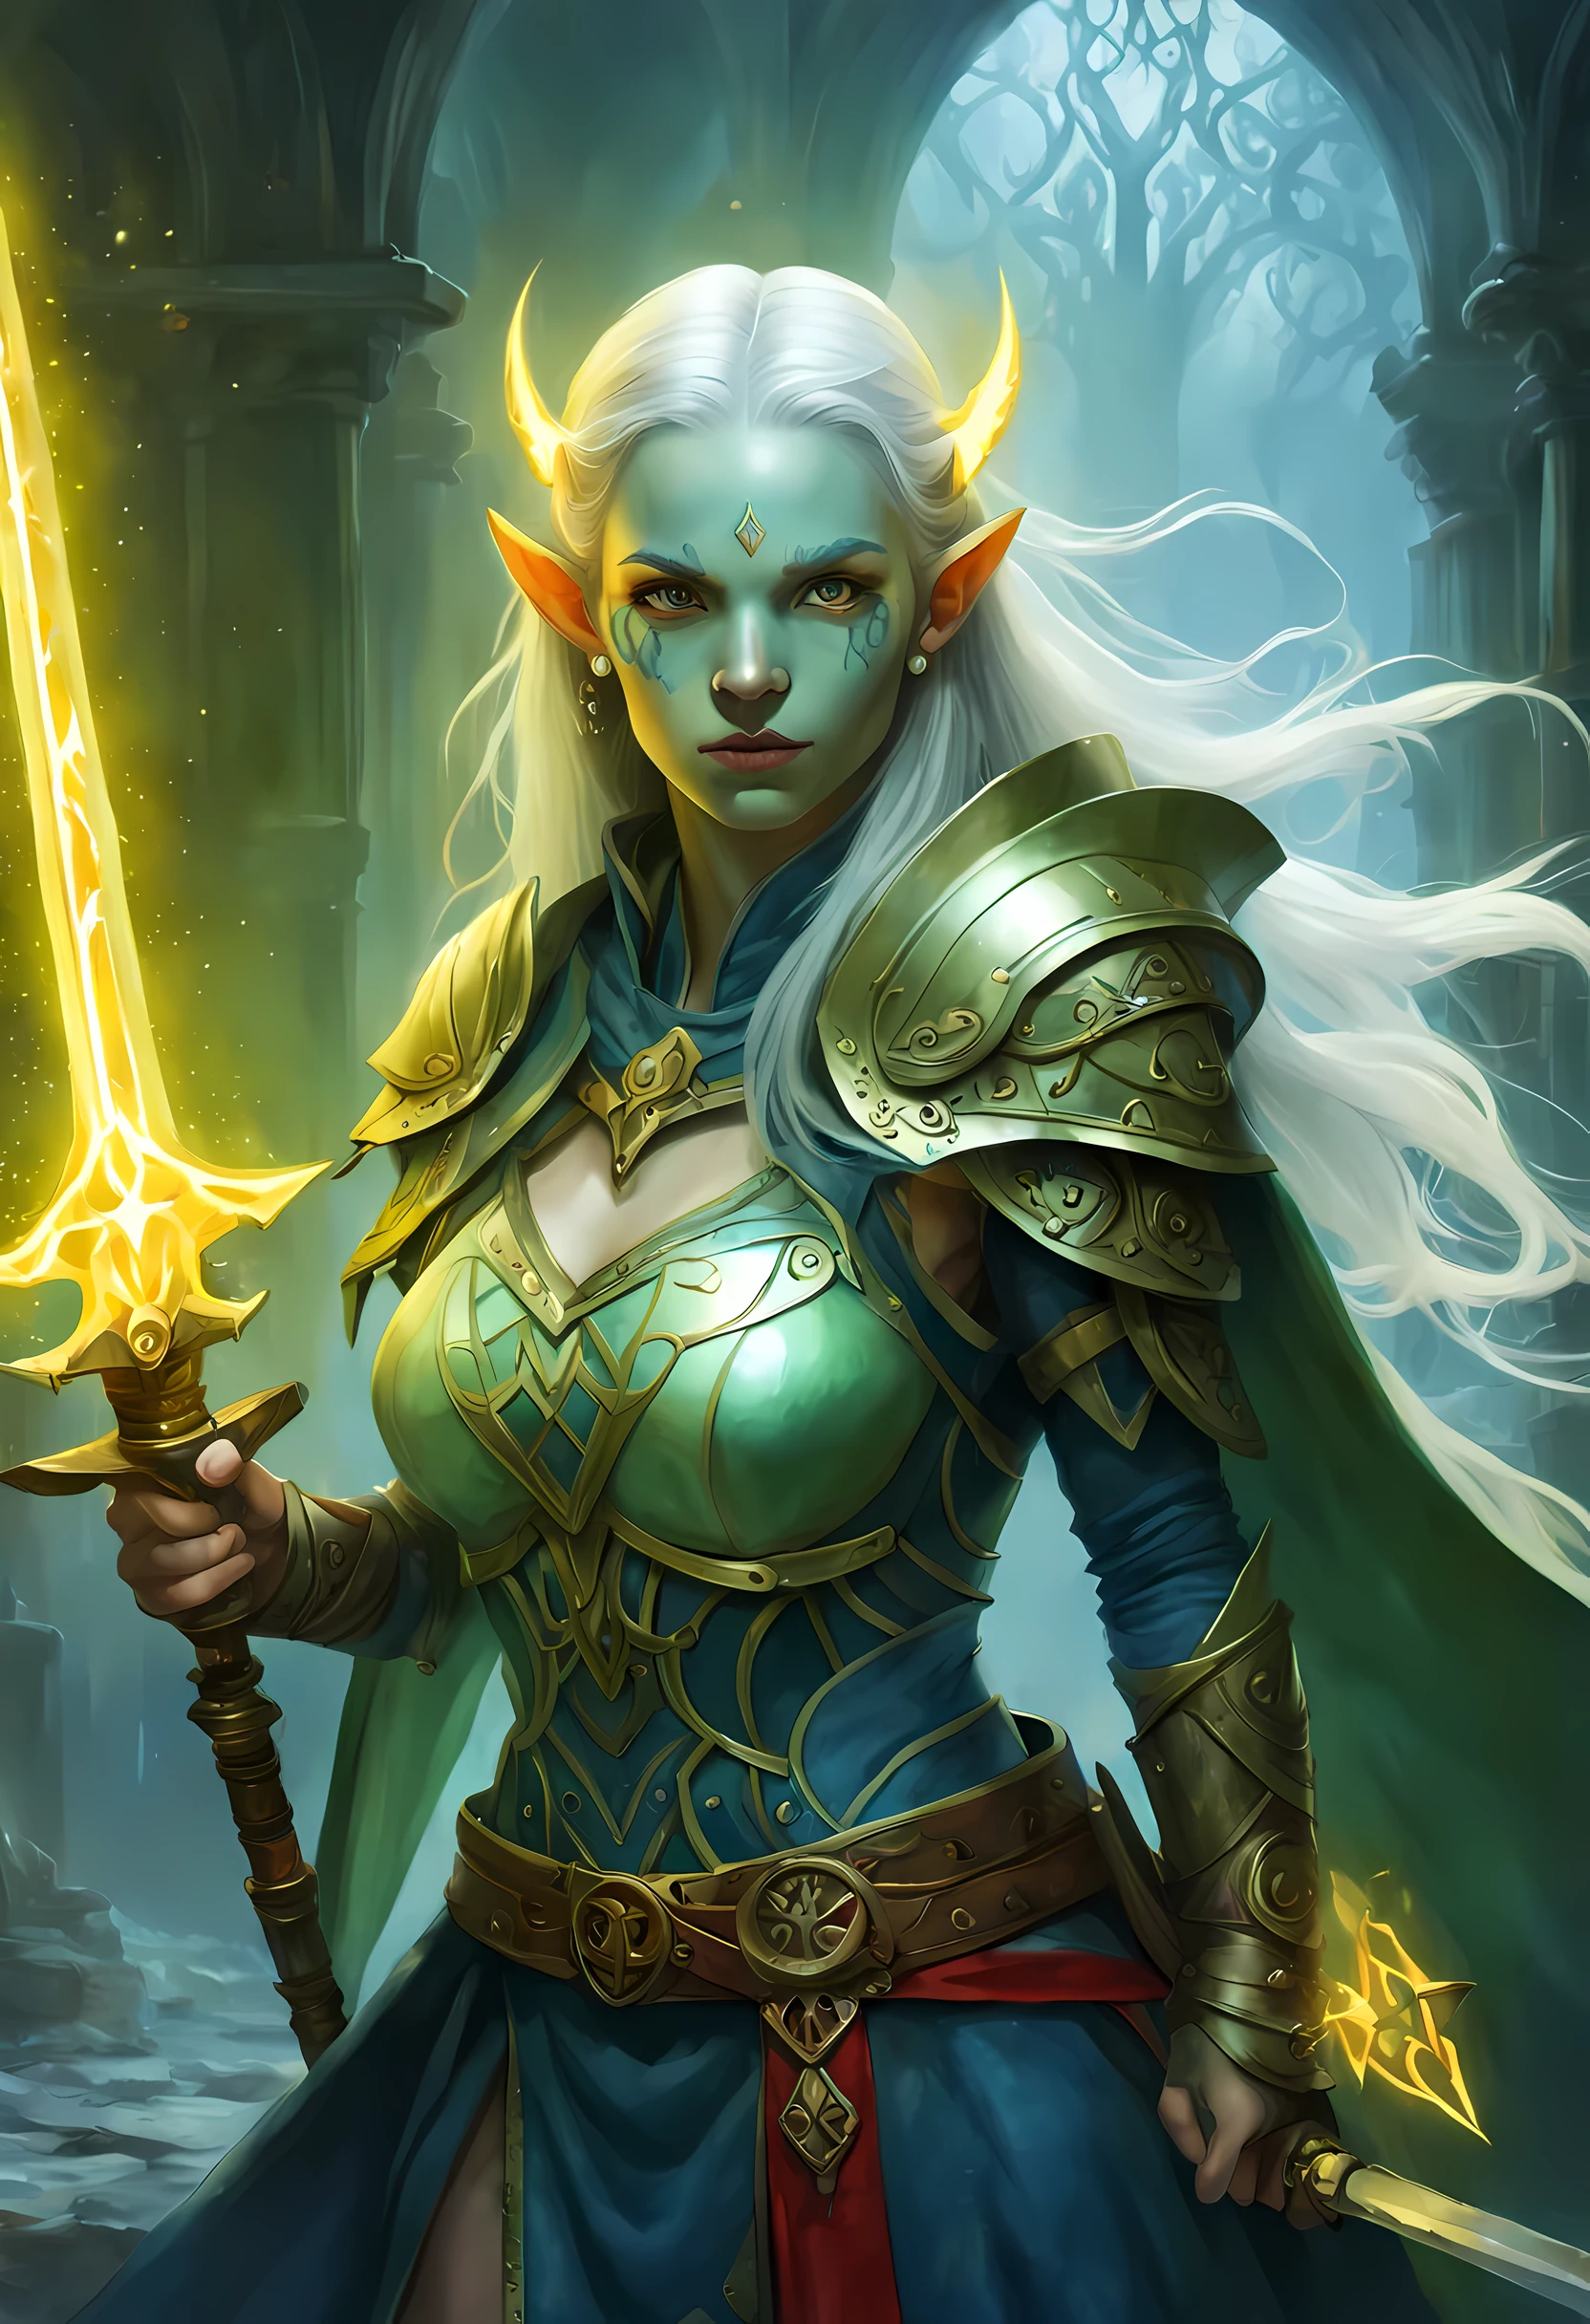 fantasy art, dnd art, RPG art, wide shot, (masterpiece: 1.4) a (portrait: 1.3) intense details, highly detailed, photorealistic, best quality, highres, GlowingRunesAI_yellow, portrait a female (fantasy art, Masterpiece, best quality: 1.3) bl3uprint ((blue skin: 1.5)) intense details facial details, exquisite beauty, (fantasy art, Masterpiece, best quality) cleric, (blue: 1.3) skinned female, (white hair: 1.3), long hair, intense (green: 1.3) eye, fantasy art, Masterpiece, best quality) armed a fiery sword red fire, wearing heavy (white: 1.3) half plate mail armor, wearing high heeled laced boots, wearing an(orange :1.3) cloak, wearing glowing holy symbol GlowingRunes_yellow, within fantasy temple background, reflection light, high details, best quality, 16k, [ultra detailed], masterpiece, best quality, (extremely detailed), close up, ultra wide shot, photorealistic, RAW, fantasy art, dnd art, fantasy art, realistic art,((best quality)), ((masterpiece)), (detailed), perfect face, ((no ears: 1.6))